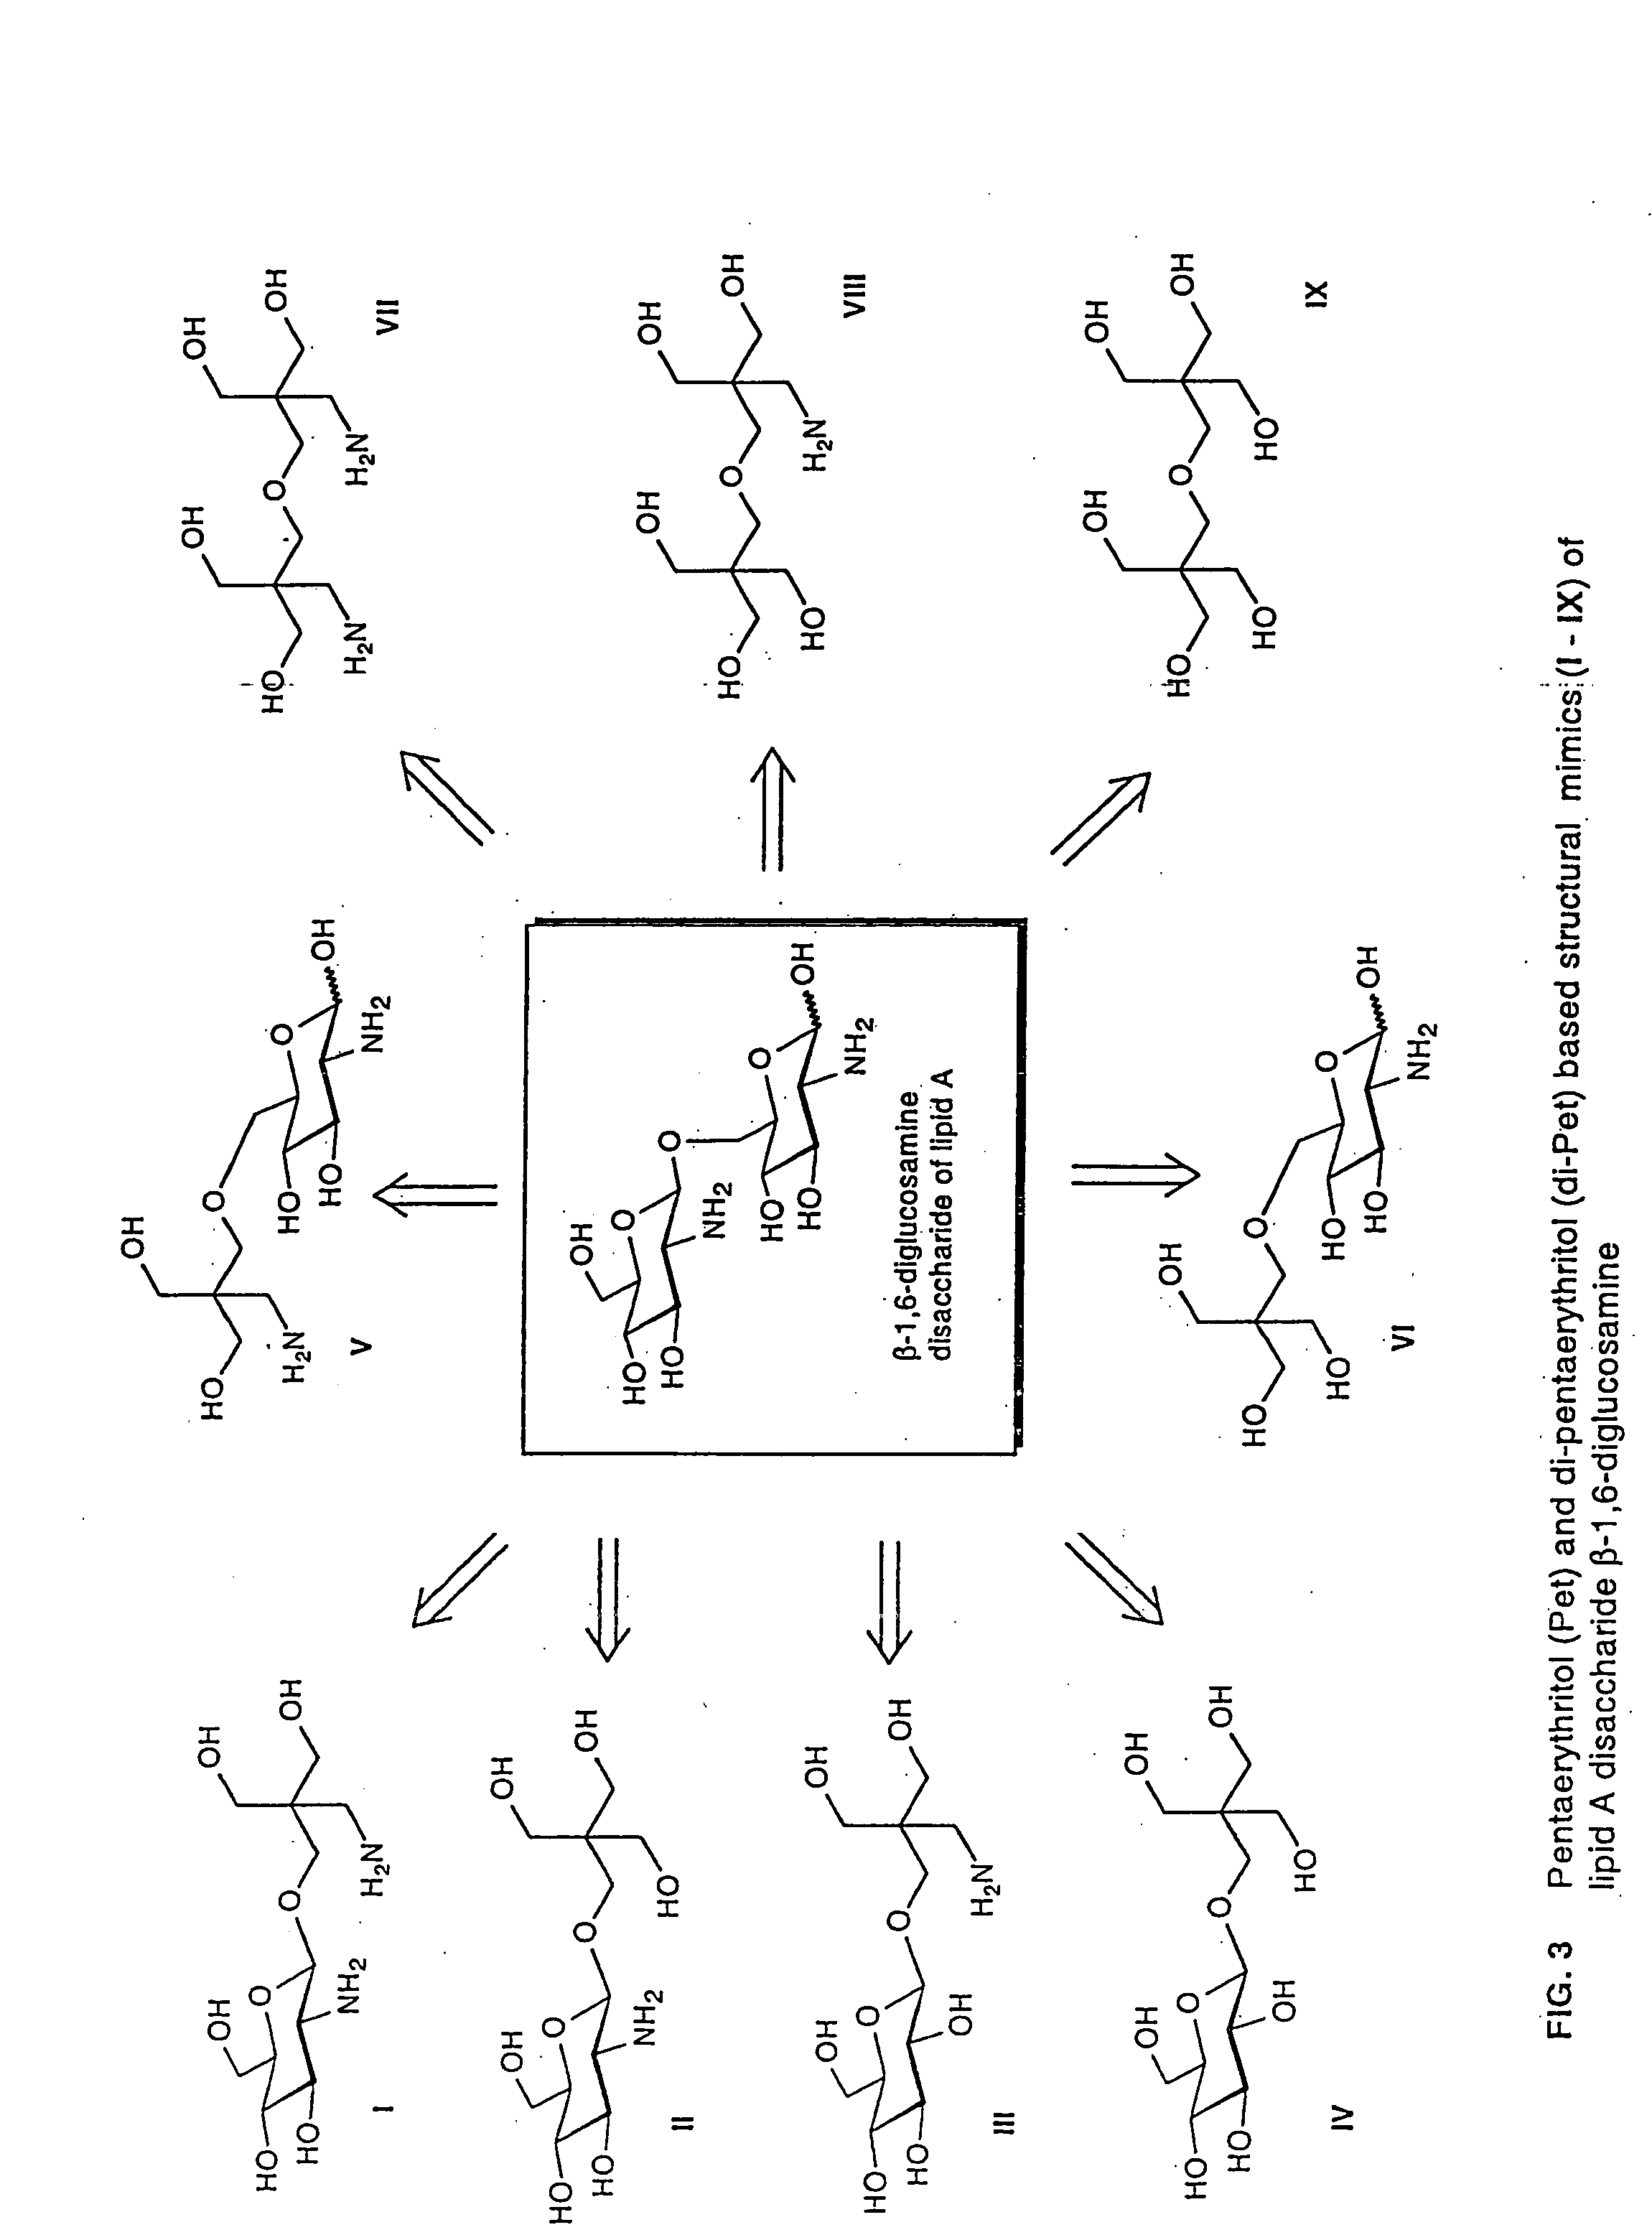 Lipid a and other carbohydrate ligand analogs